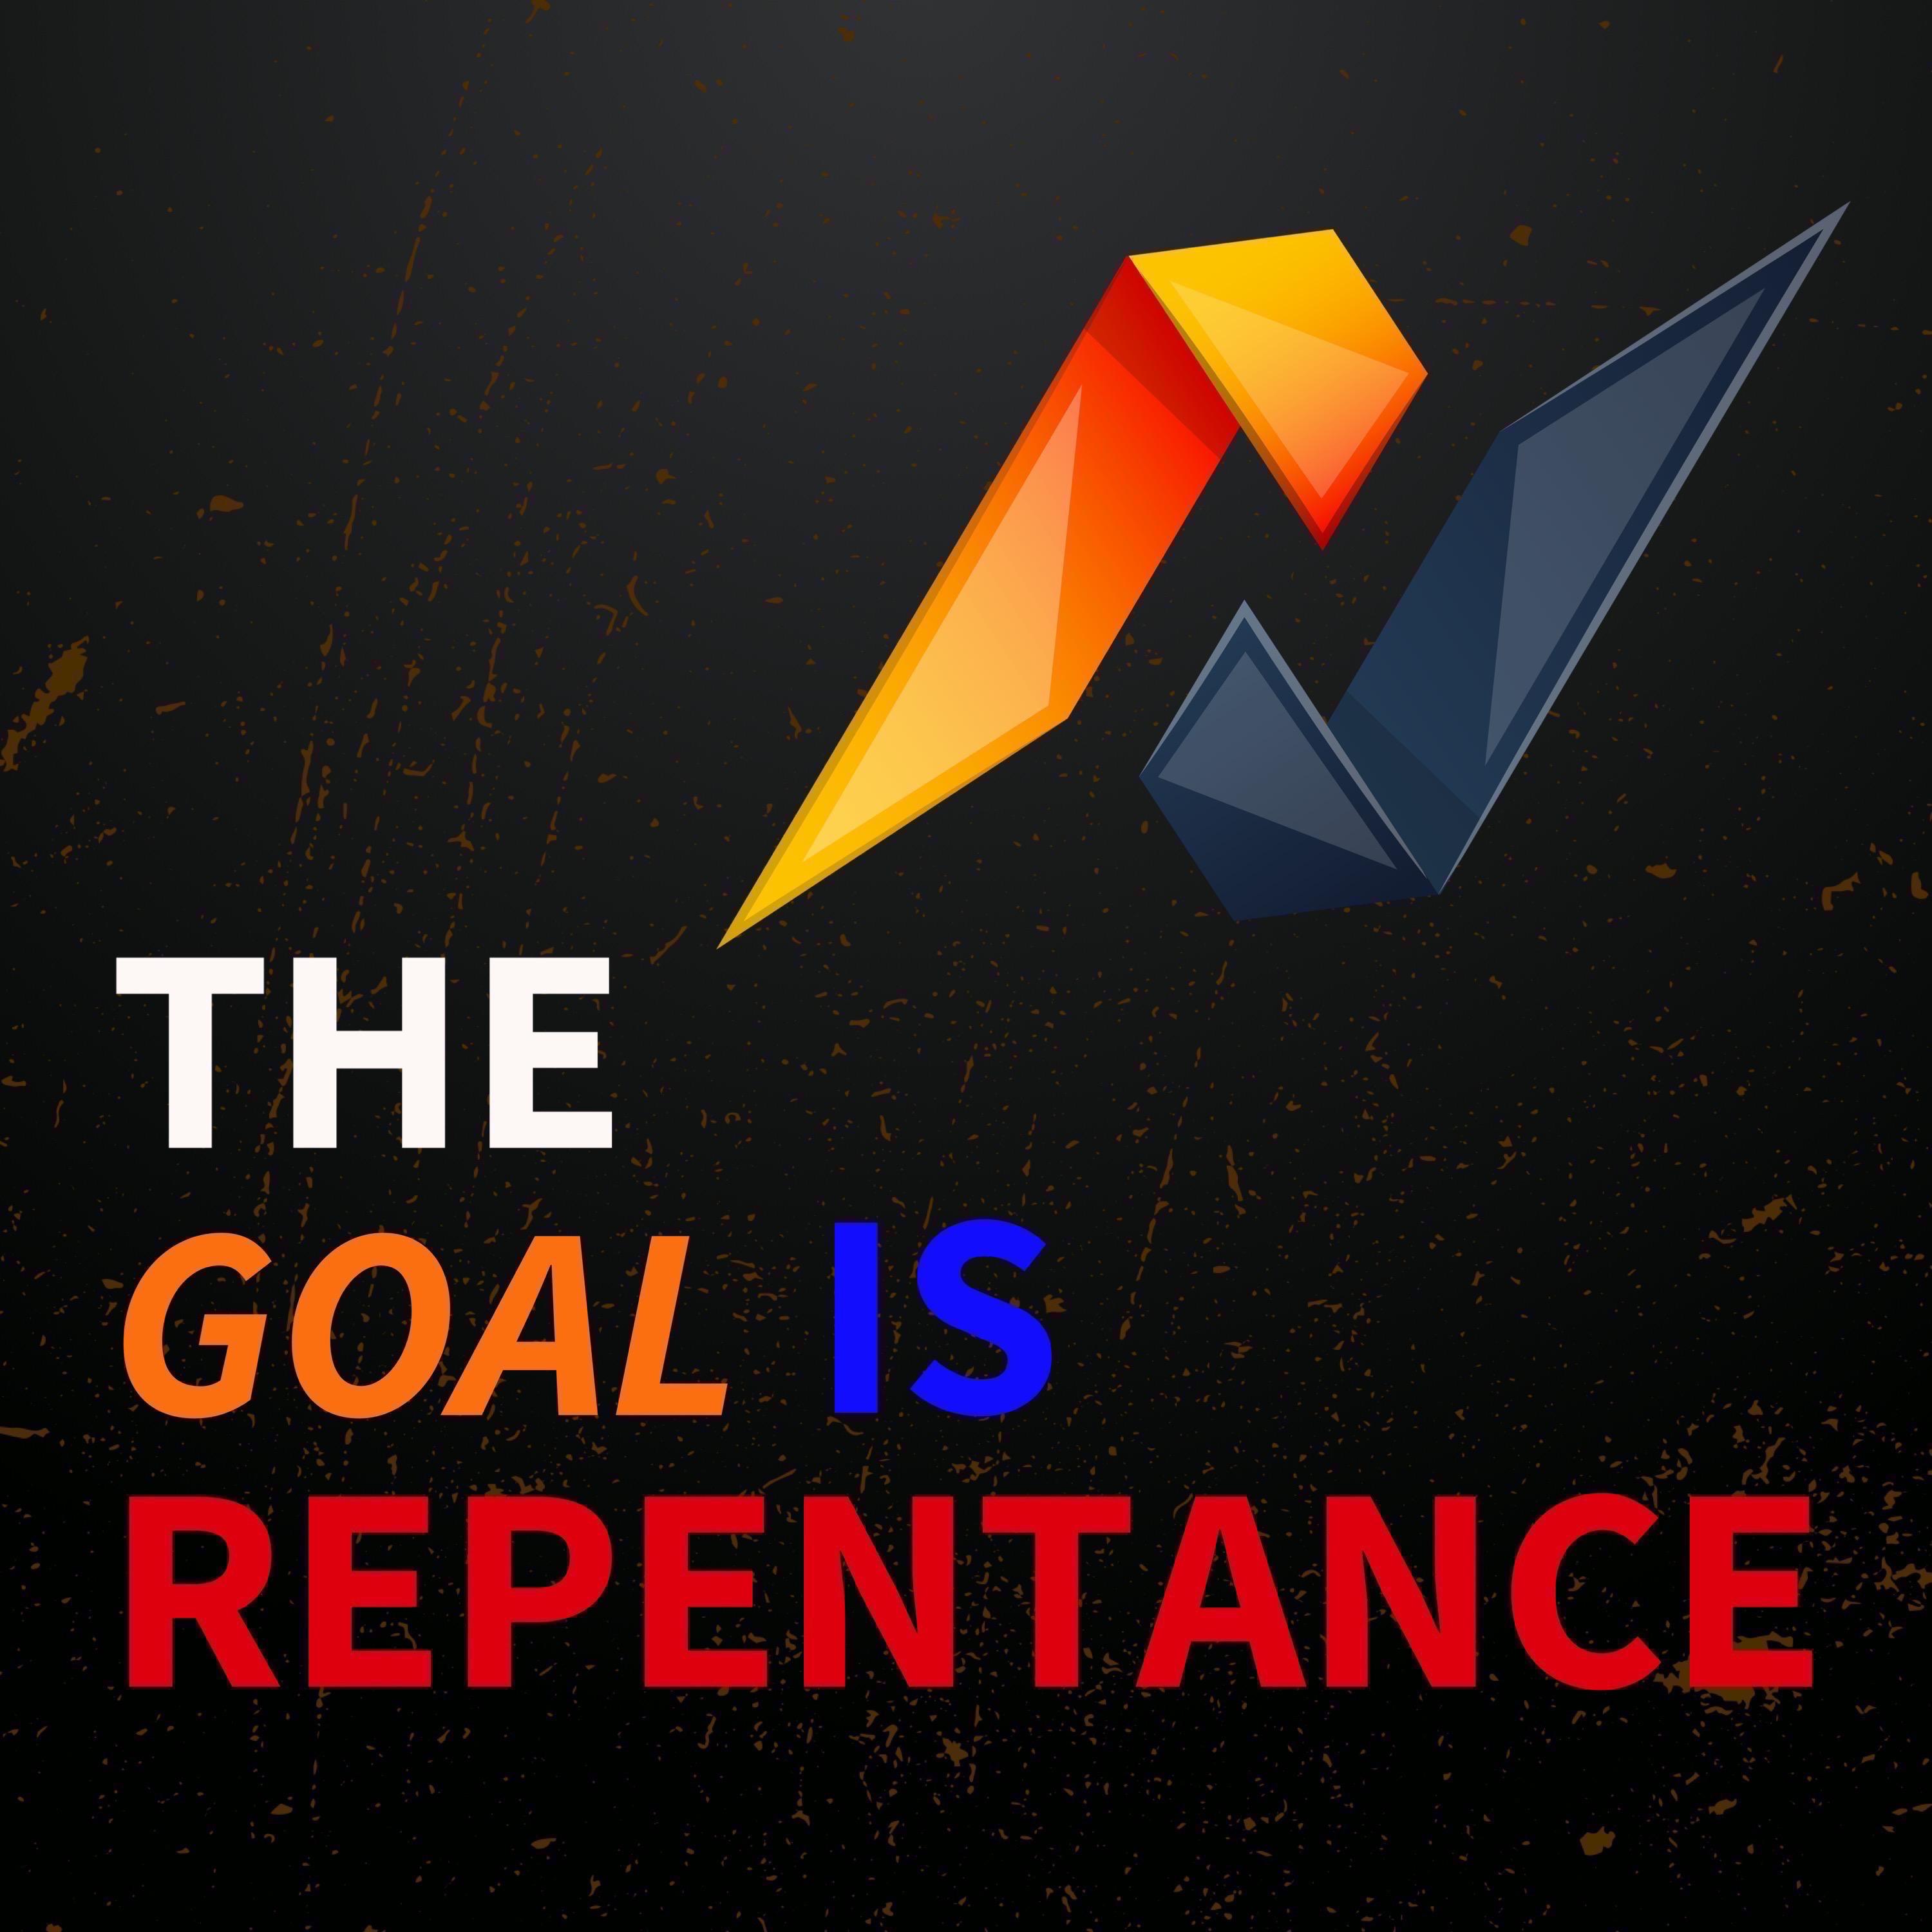 THE GOAL IS REPENTANCE